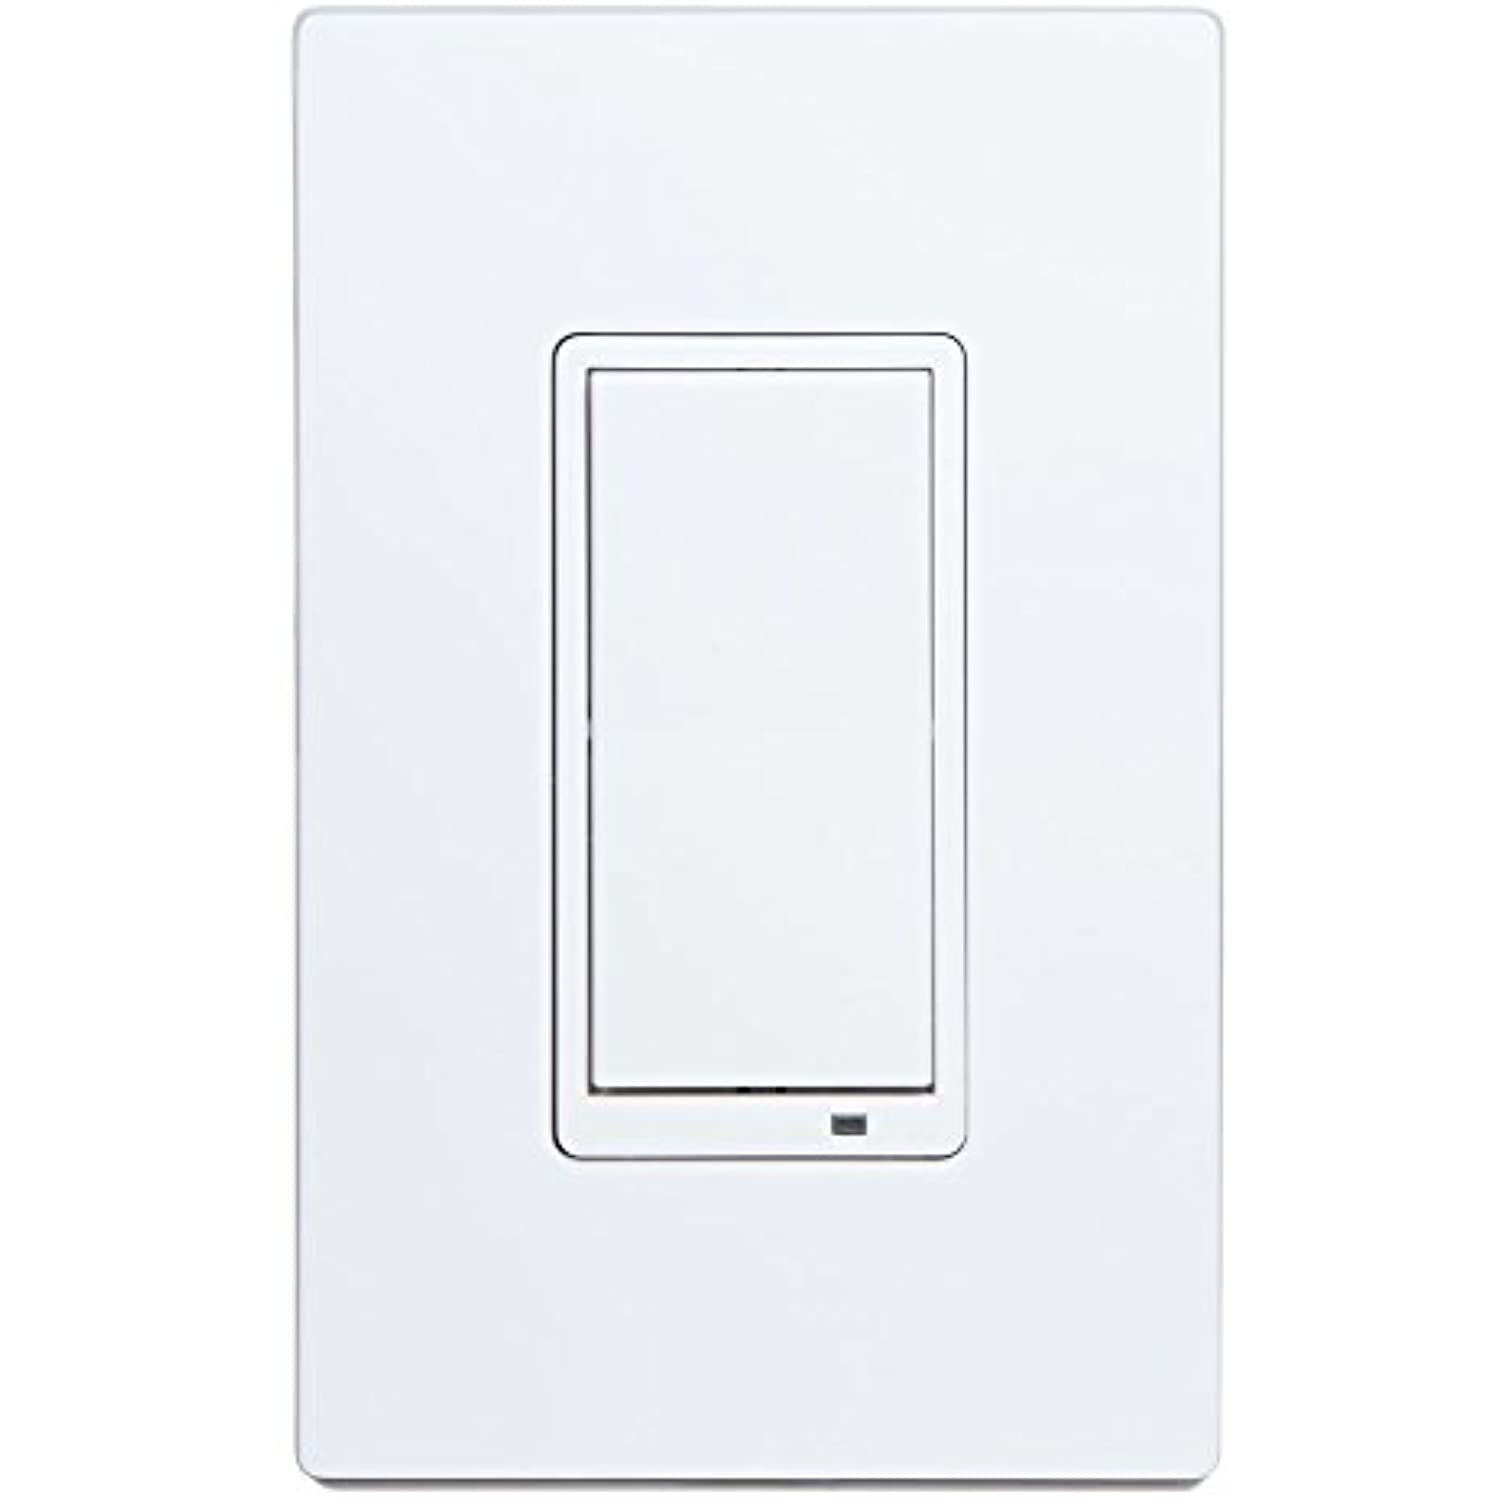 Honeywell Z5SWPID Plug-In Switch/Dual Outlet Z-Wave Plus